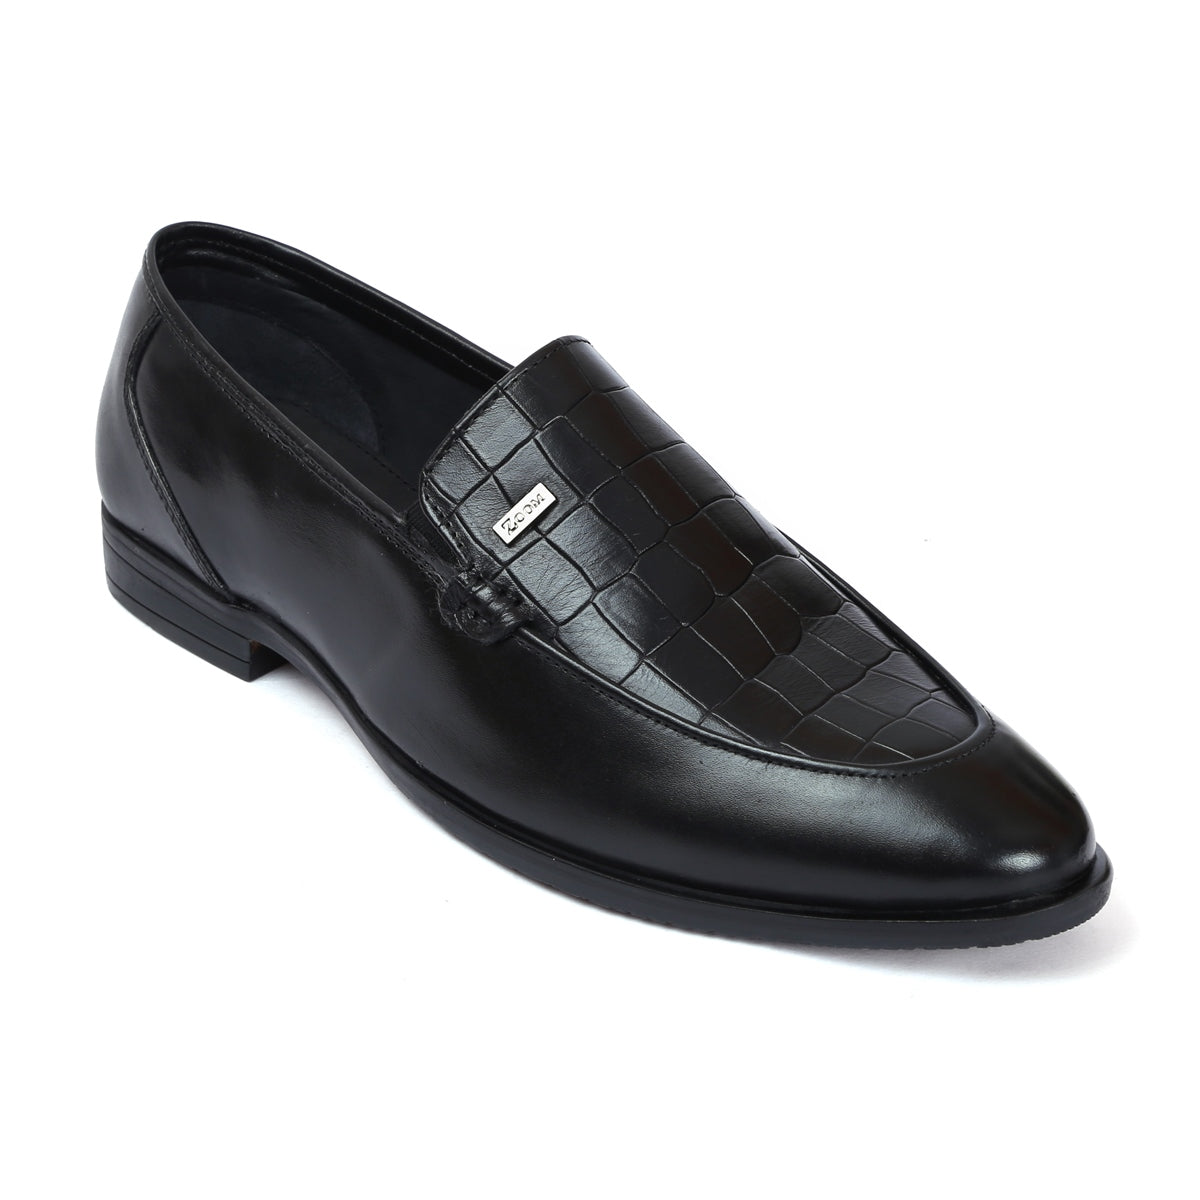 Classic Leather Loafers for Men S-3211